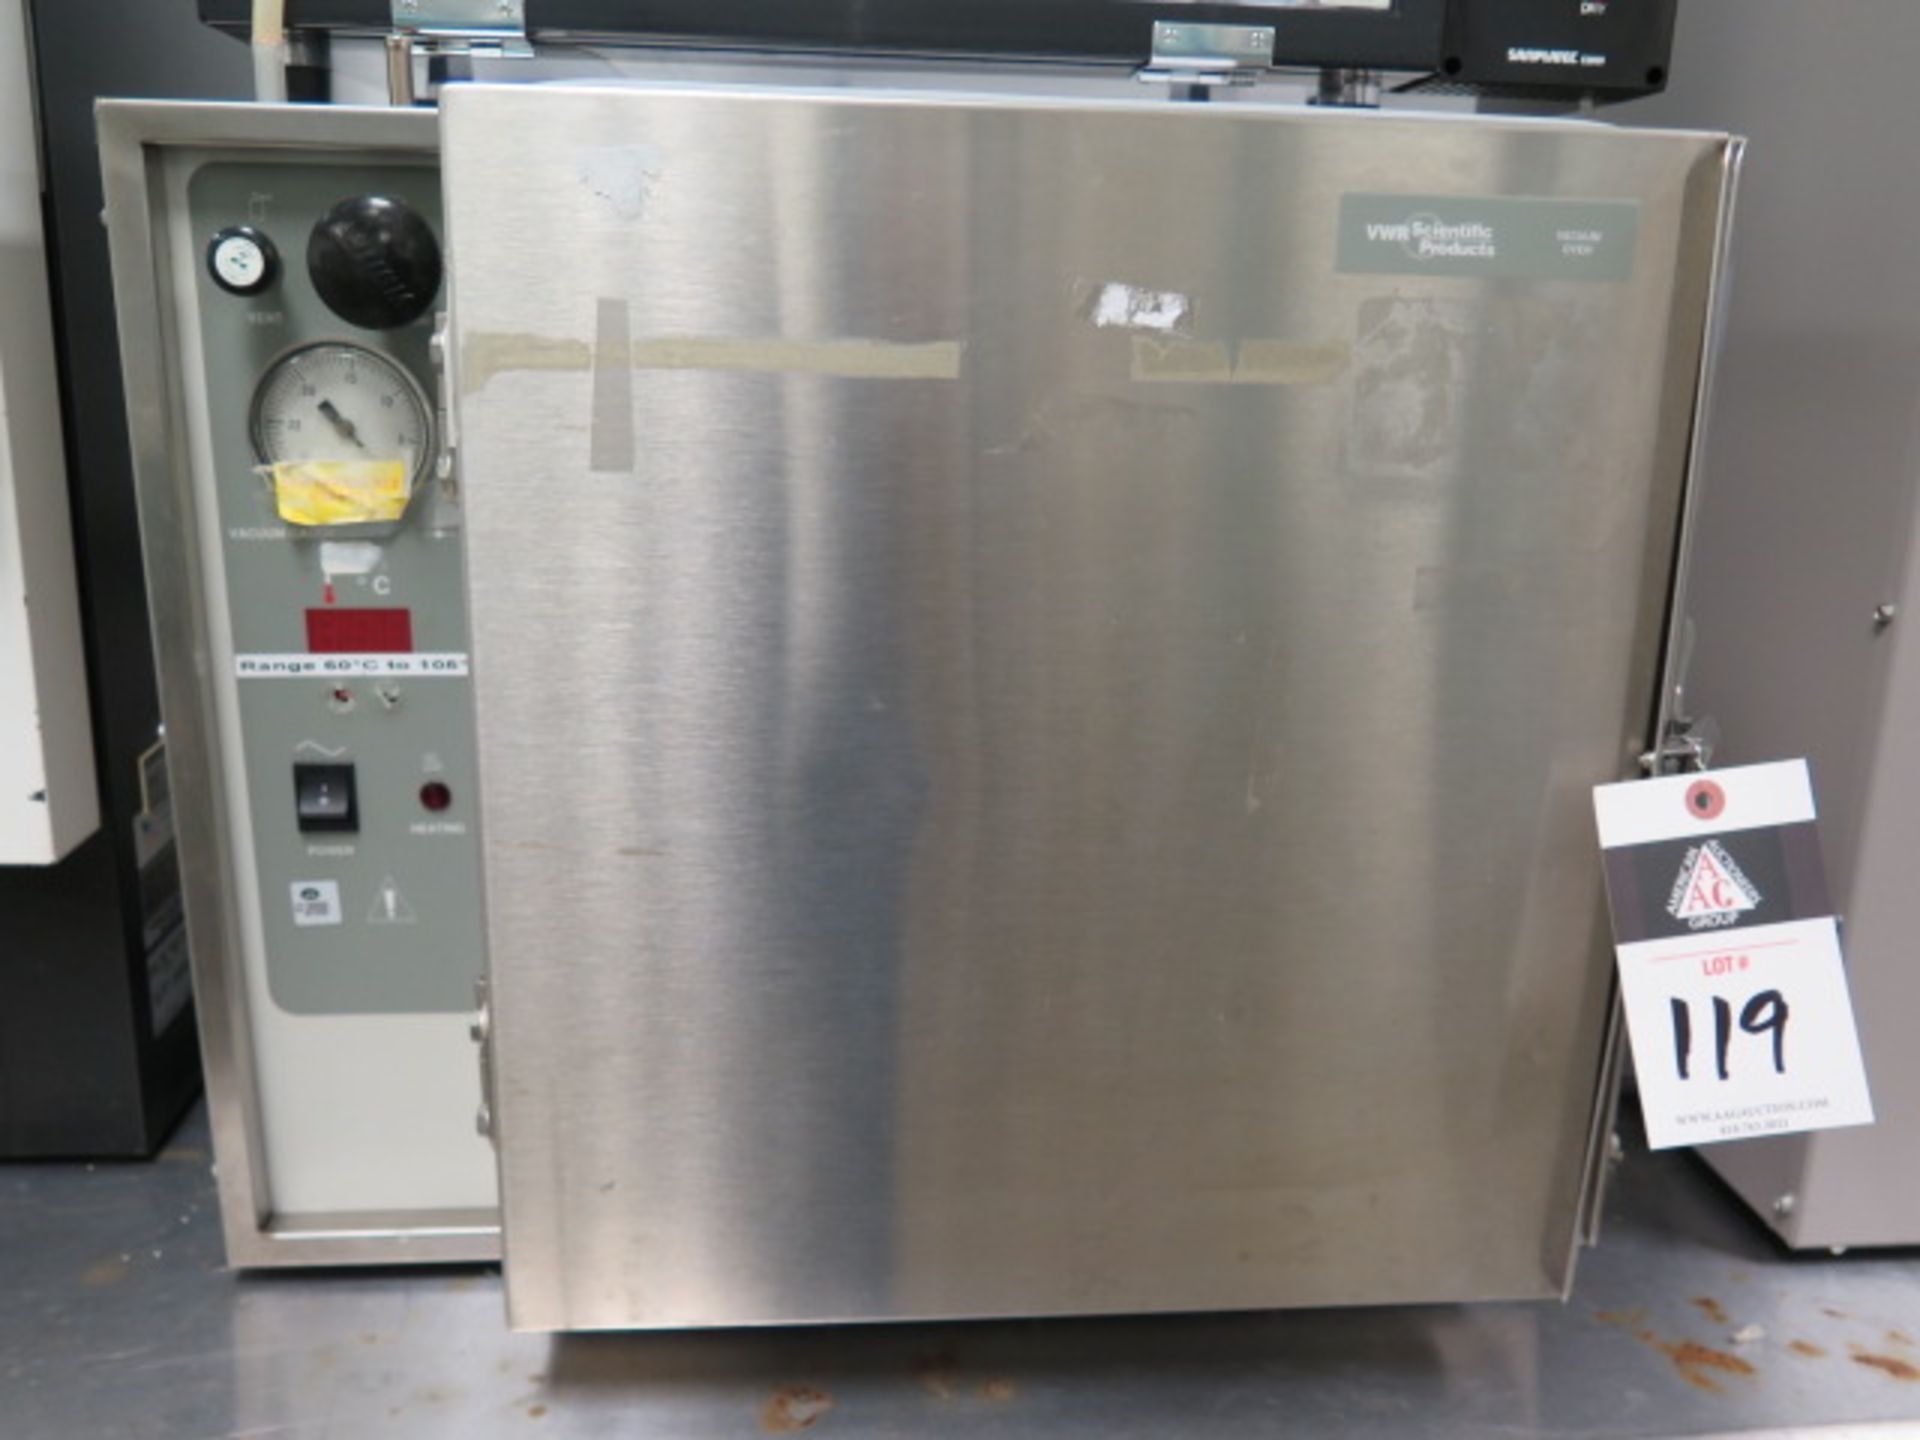 VWR mdl. 1430M Vacuum Oven s/n 1201098 60-105 Degrees C (SOLD AS-IS - NO WARRANTY)